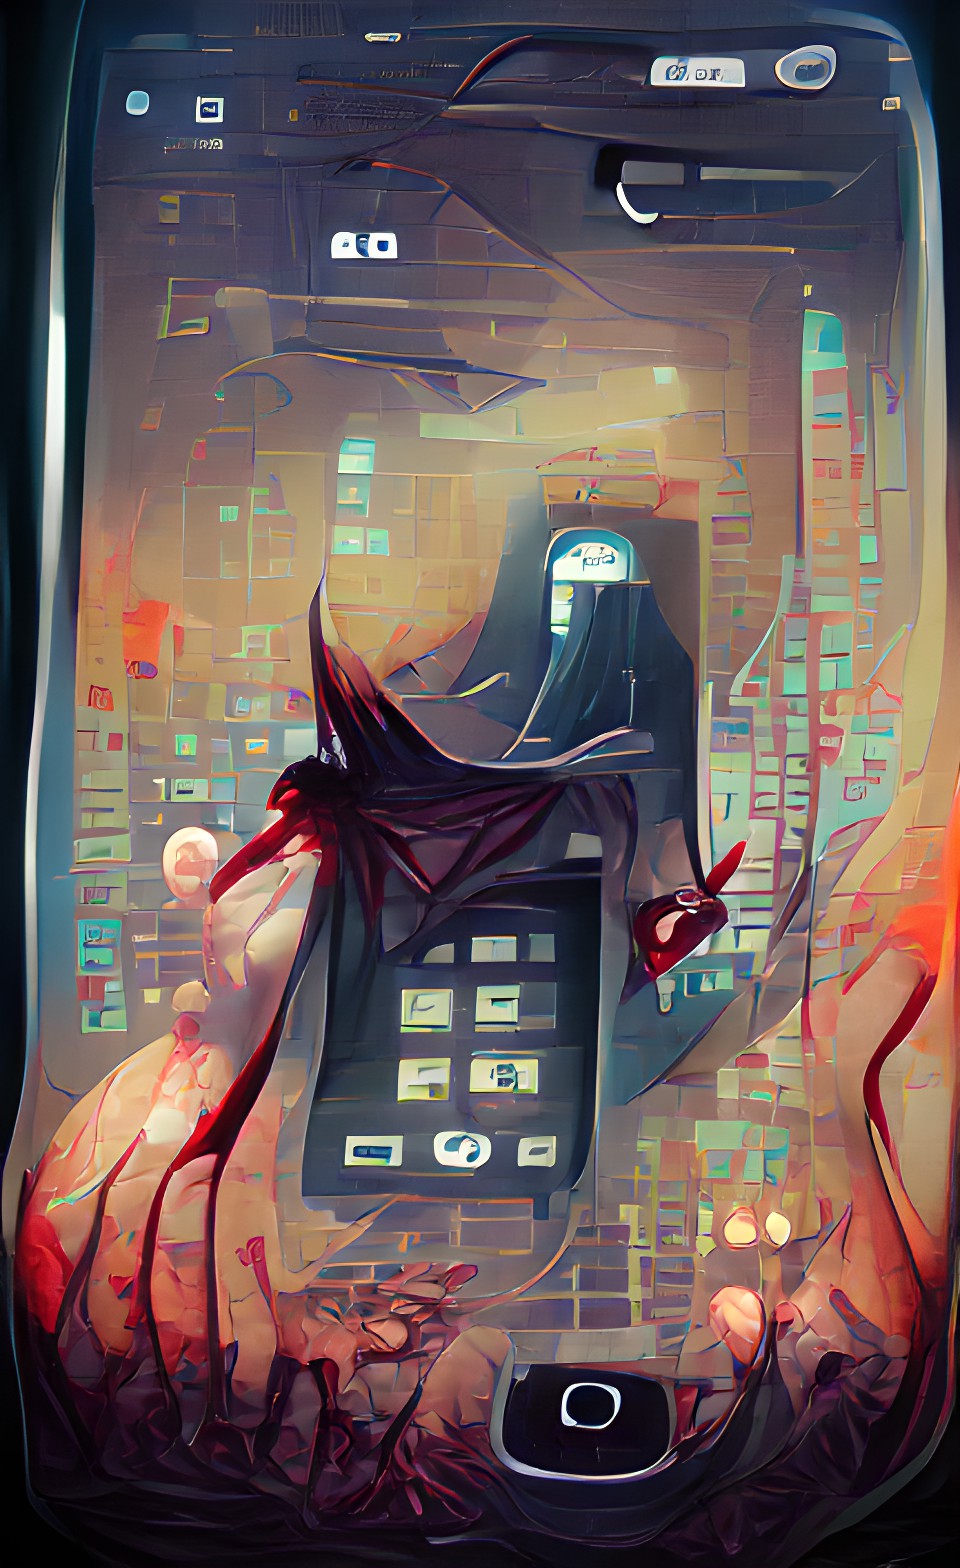 Mysterious phonecalls